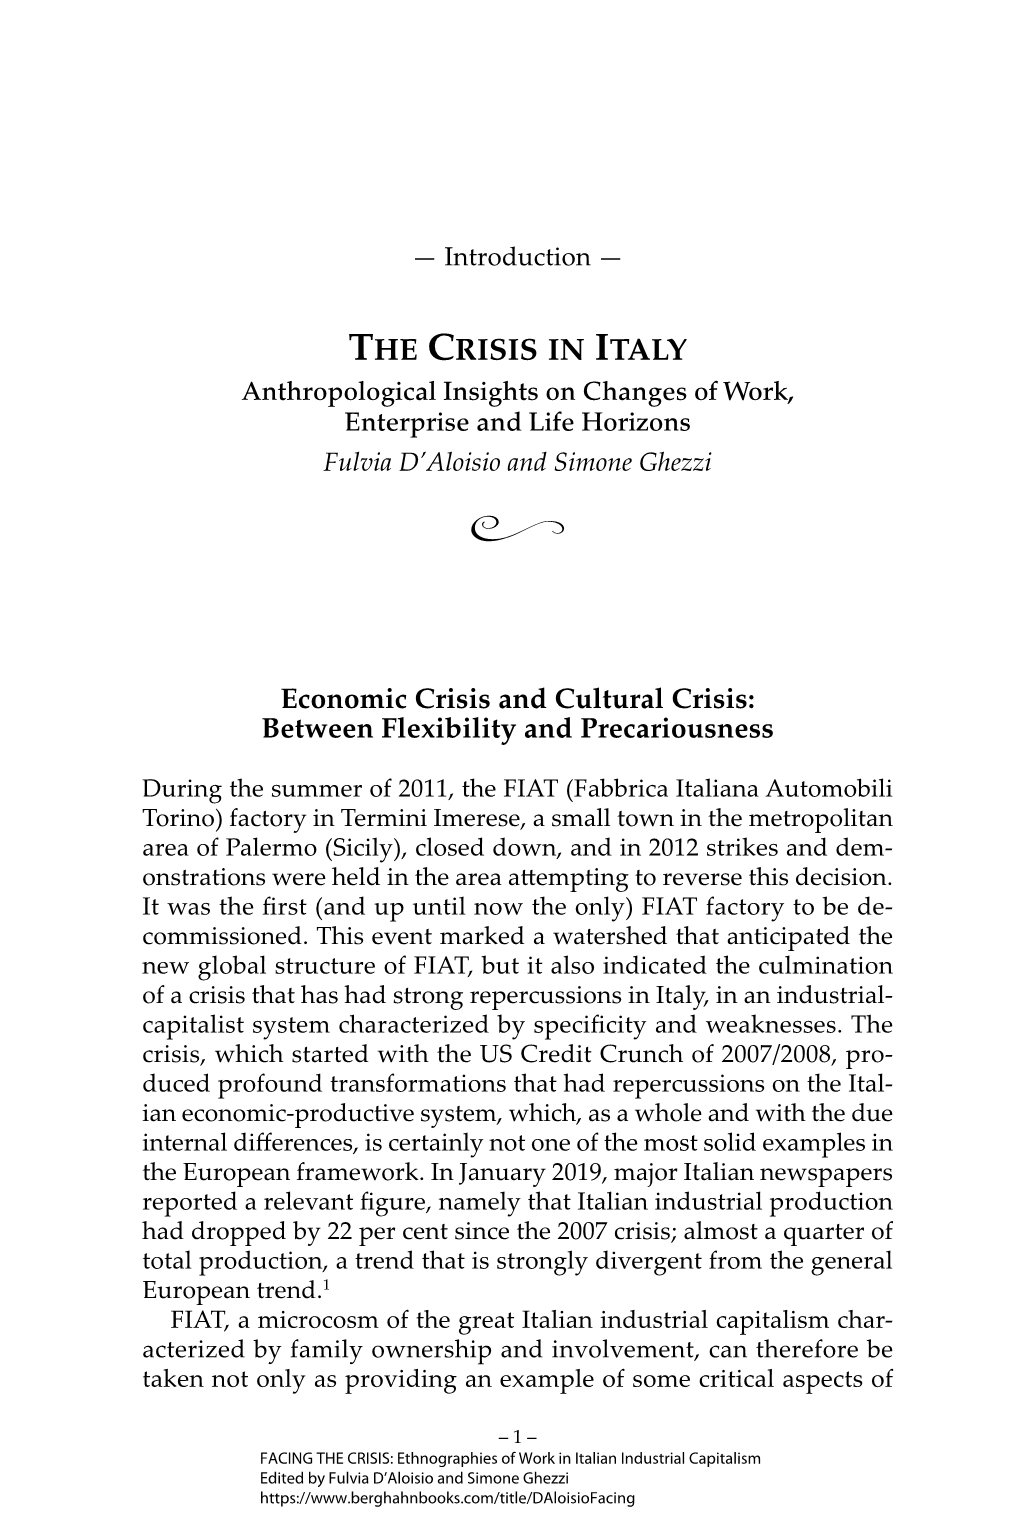 THE CRISIS in ITALY Anthropological Insights on Changes of Work, Enterprise and Life Horizons Fulvia D’Aloisio and Simone Ghezzi